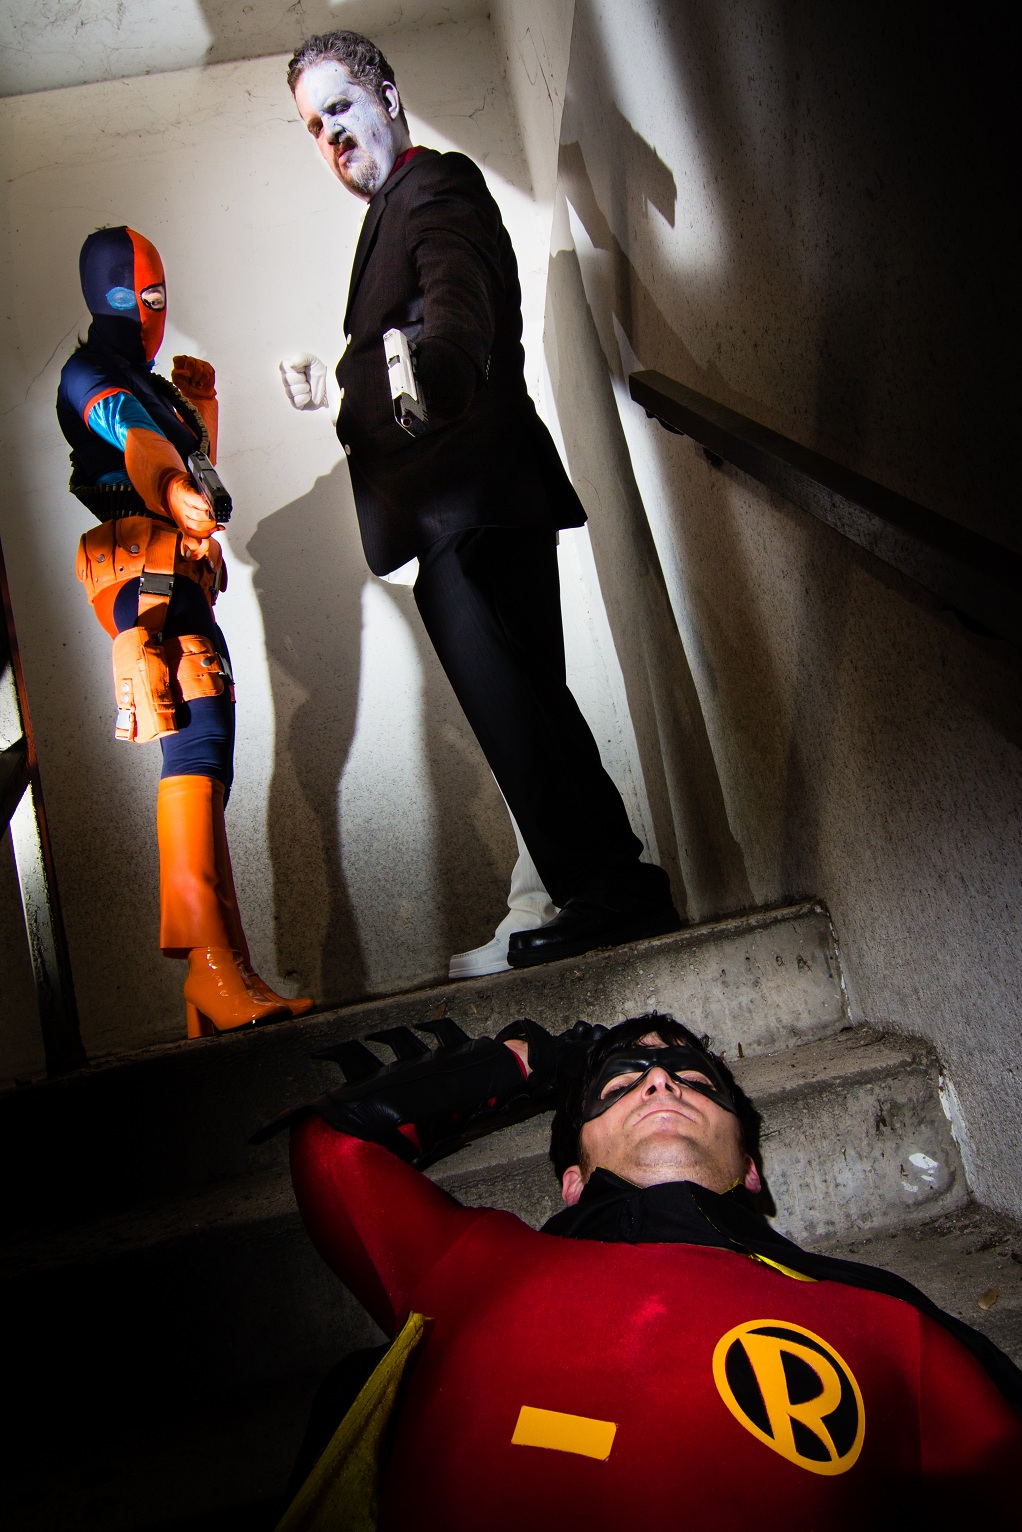 Deathstroke and Two-Face capture Robin!